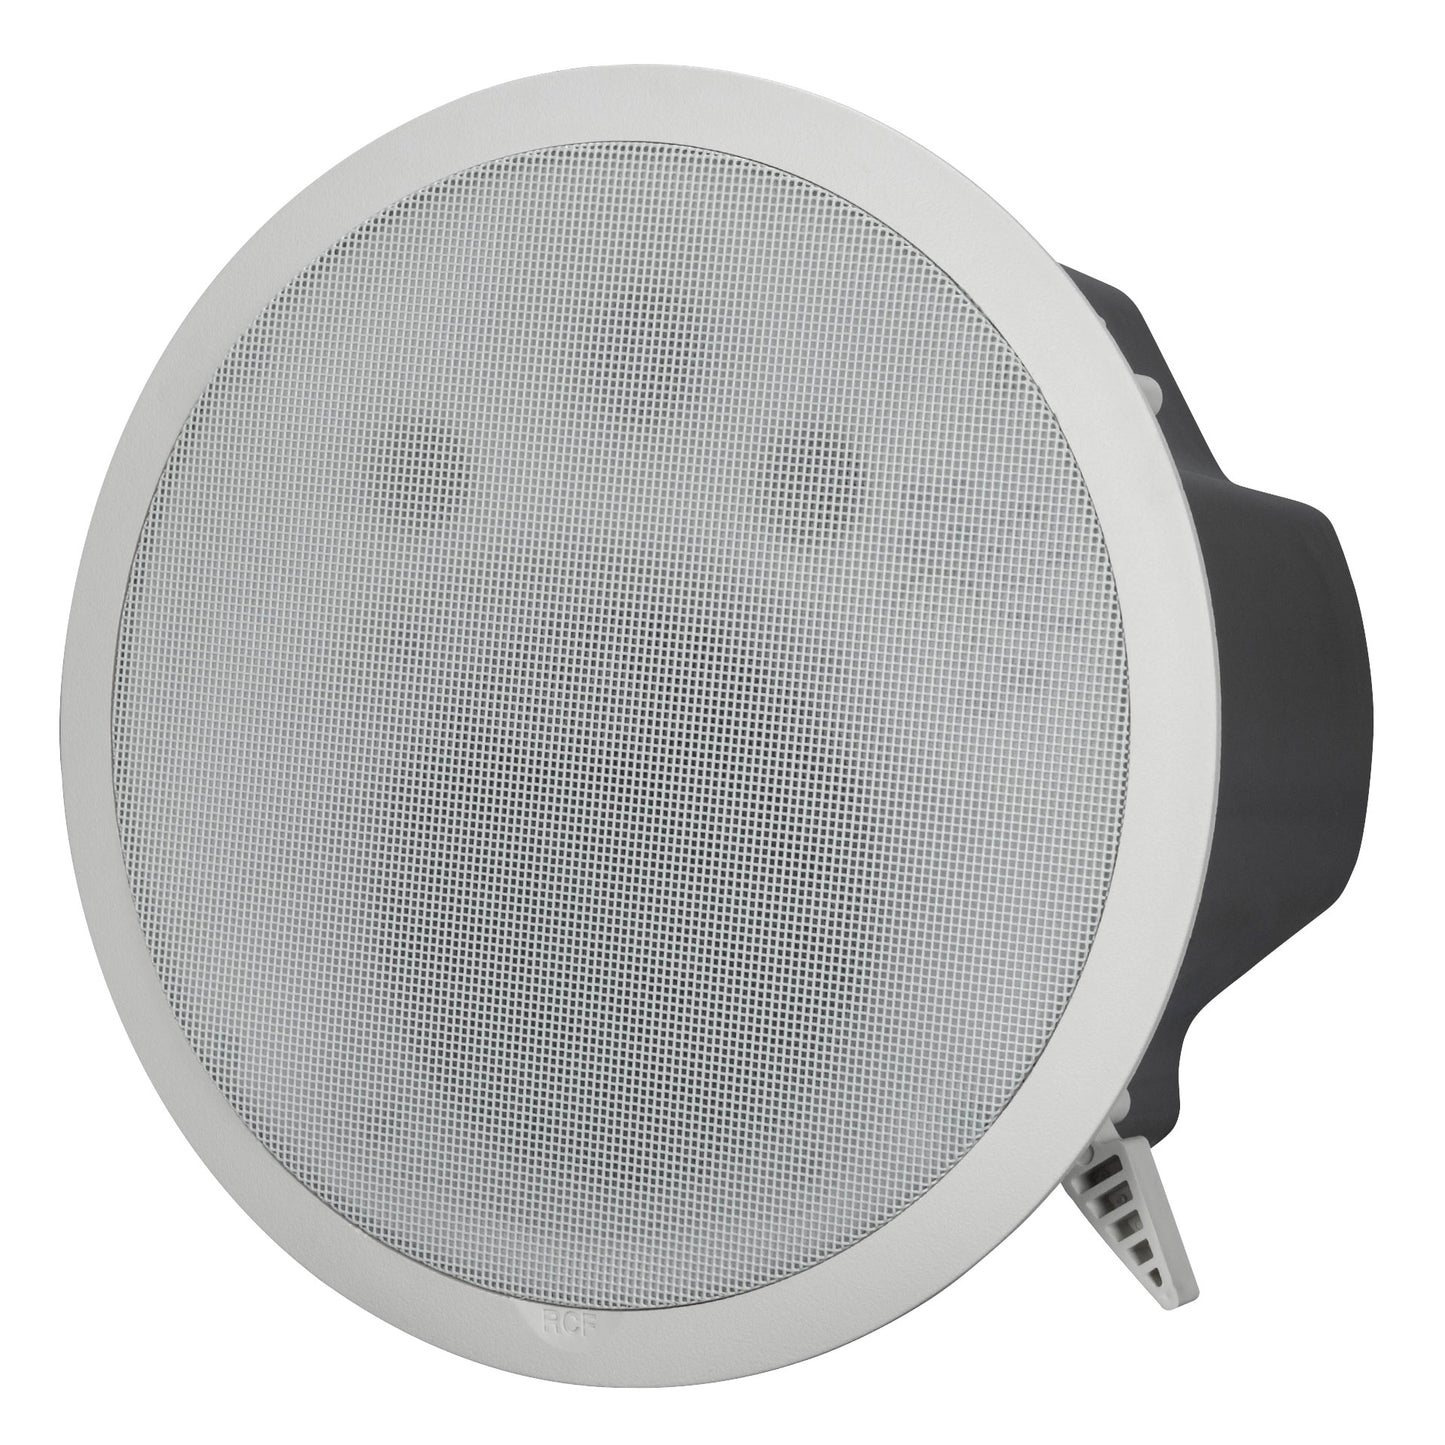 RCF MQ50C-W Passive 5" 2-way Ceiling Speaker with backcan (16 ohm/70V) (Wht)